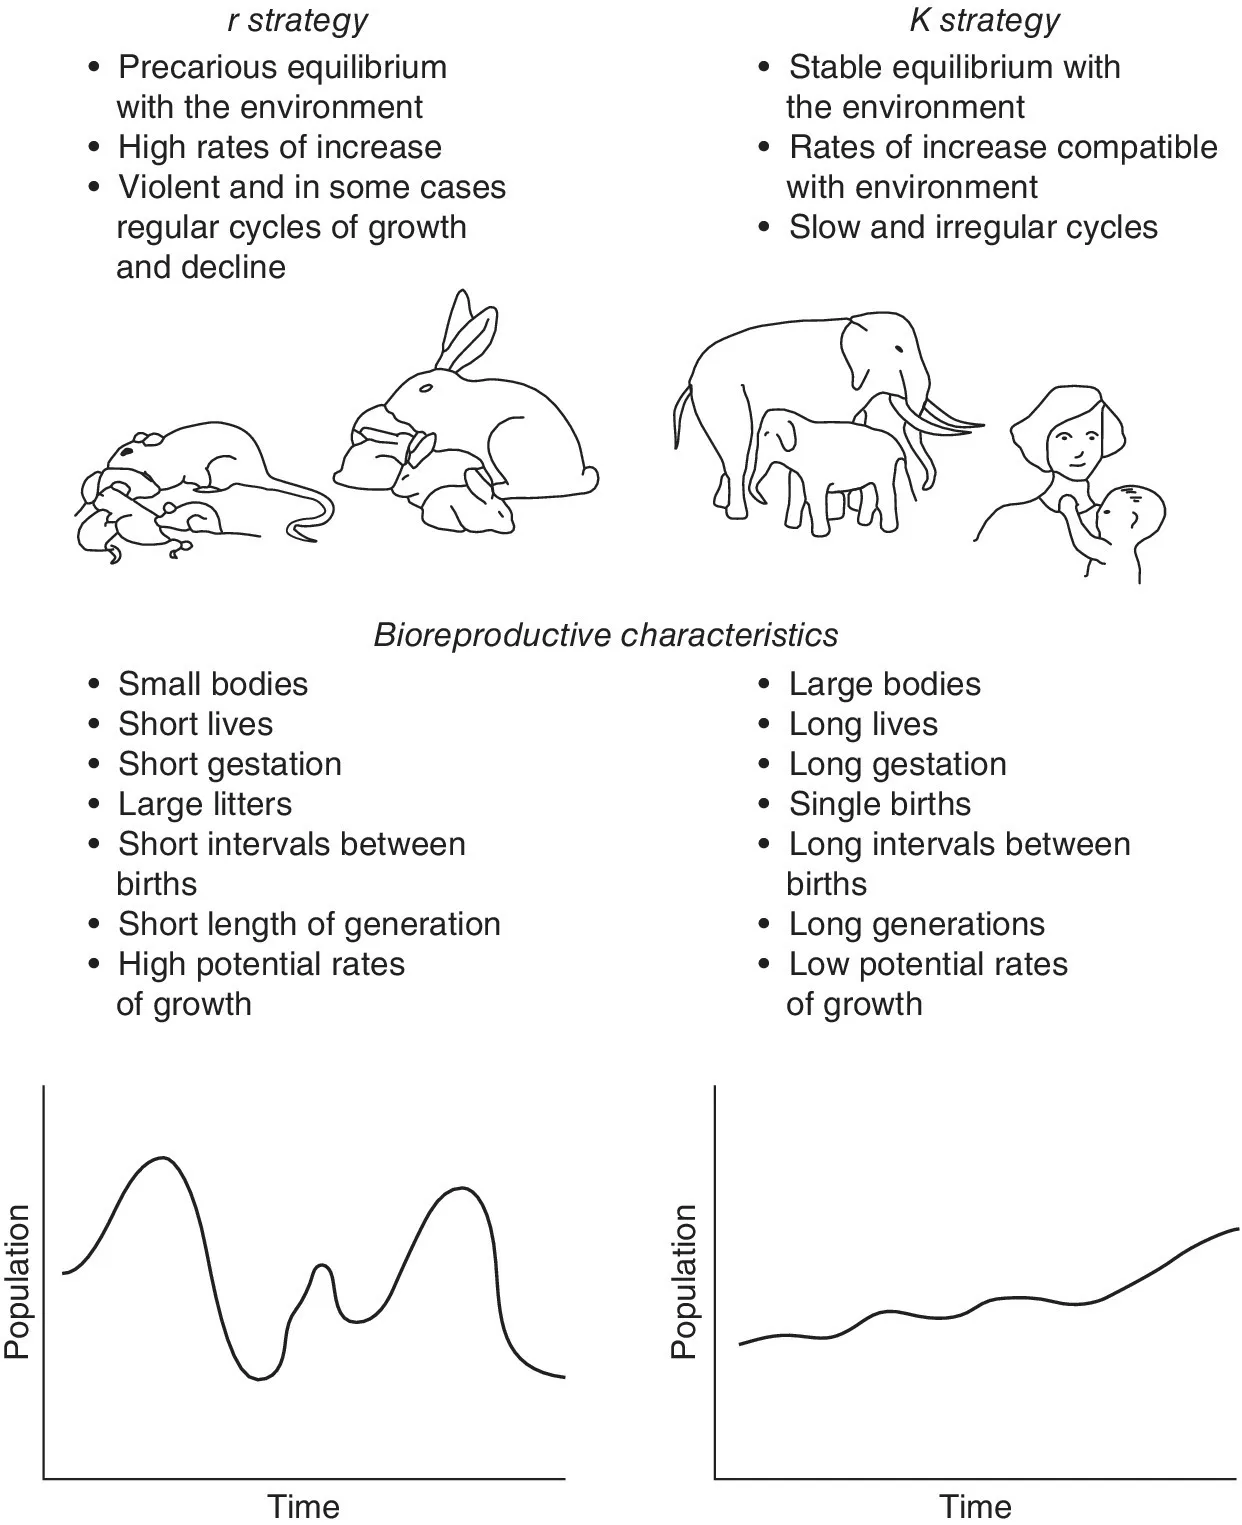 Top: Diagrams of mice and rabbits are under r strategy (left) and elephants and people are under K strategy (right). Bottom: Two graphs of population over time displaying different waves for r and K strategies.